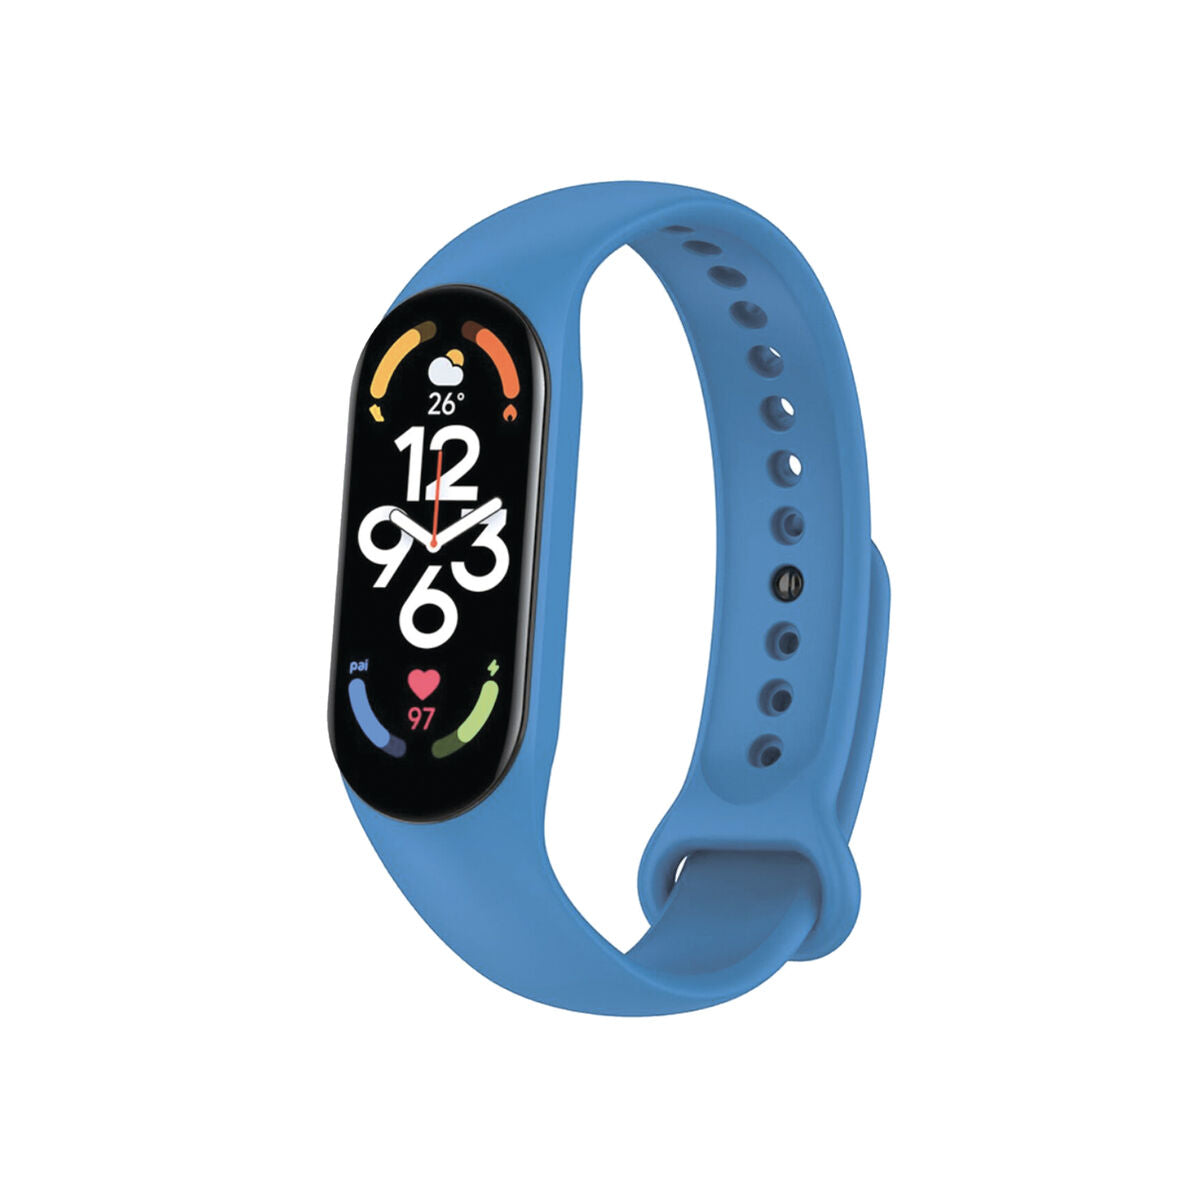 Watch Strap Contact Xiaomi Smart Band 7, Contact, Sports and outdoors, Electronics and devices, watch-strap-contact-xiaomi-smart-band-7, :Blue, Brand_Contact, category-reference-2609, category-reference-2617, category-reference-2634, category-reference-t-19756, category-reference-t-7034, category-reference-t-7035, Condition_NEW, deportista / en forma, original gifts, Price_20 - 50, telephones & tablets, vida sana, RiotNook